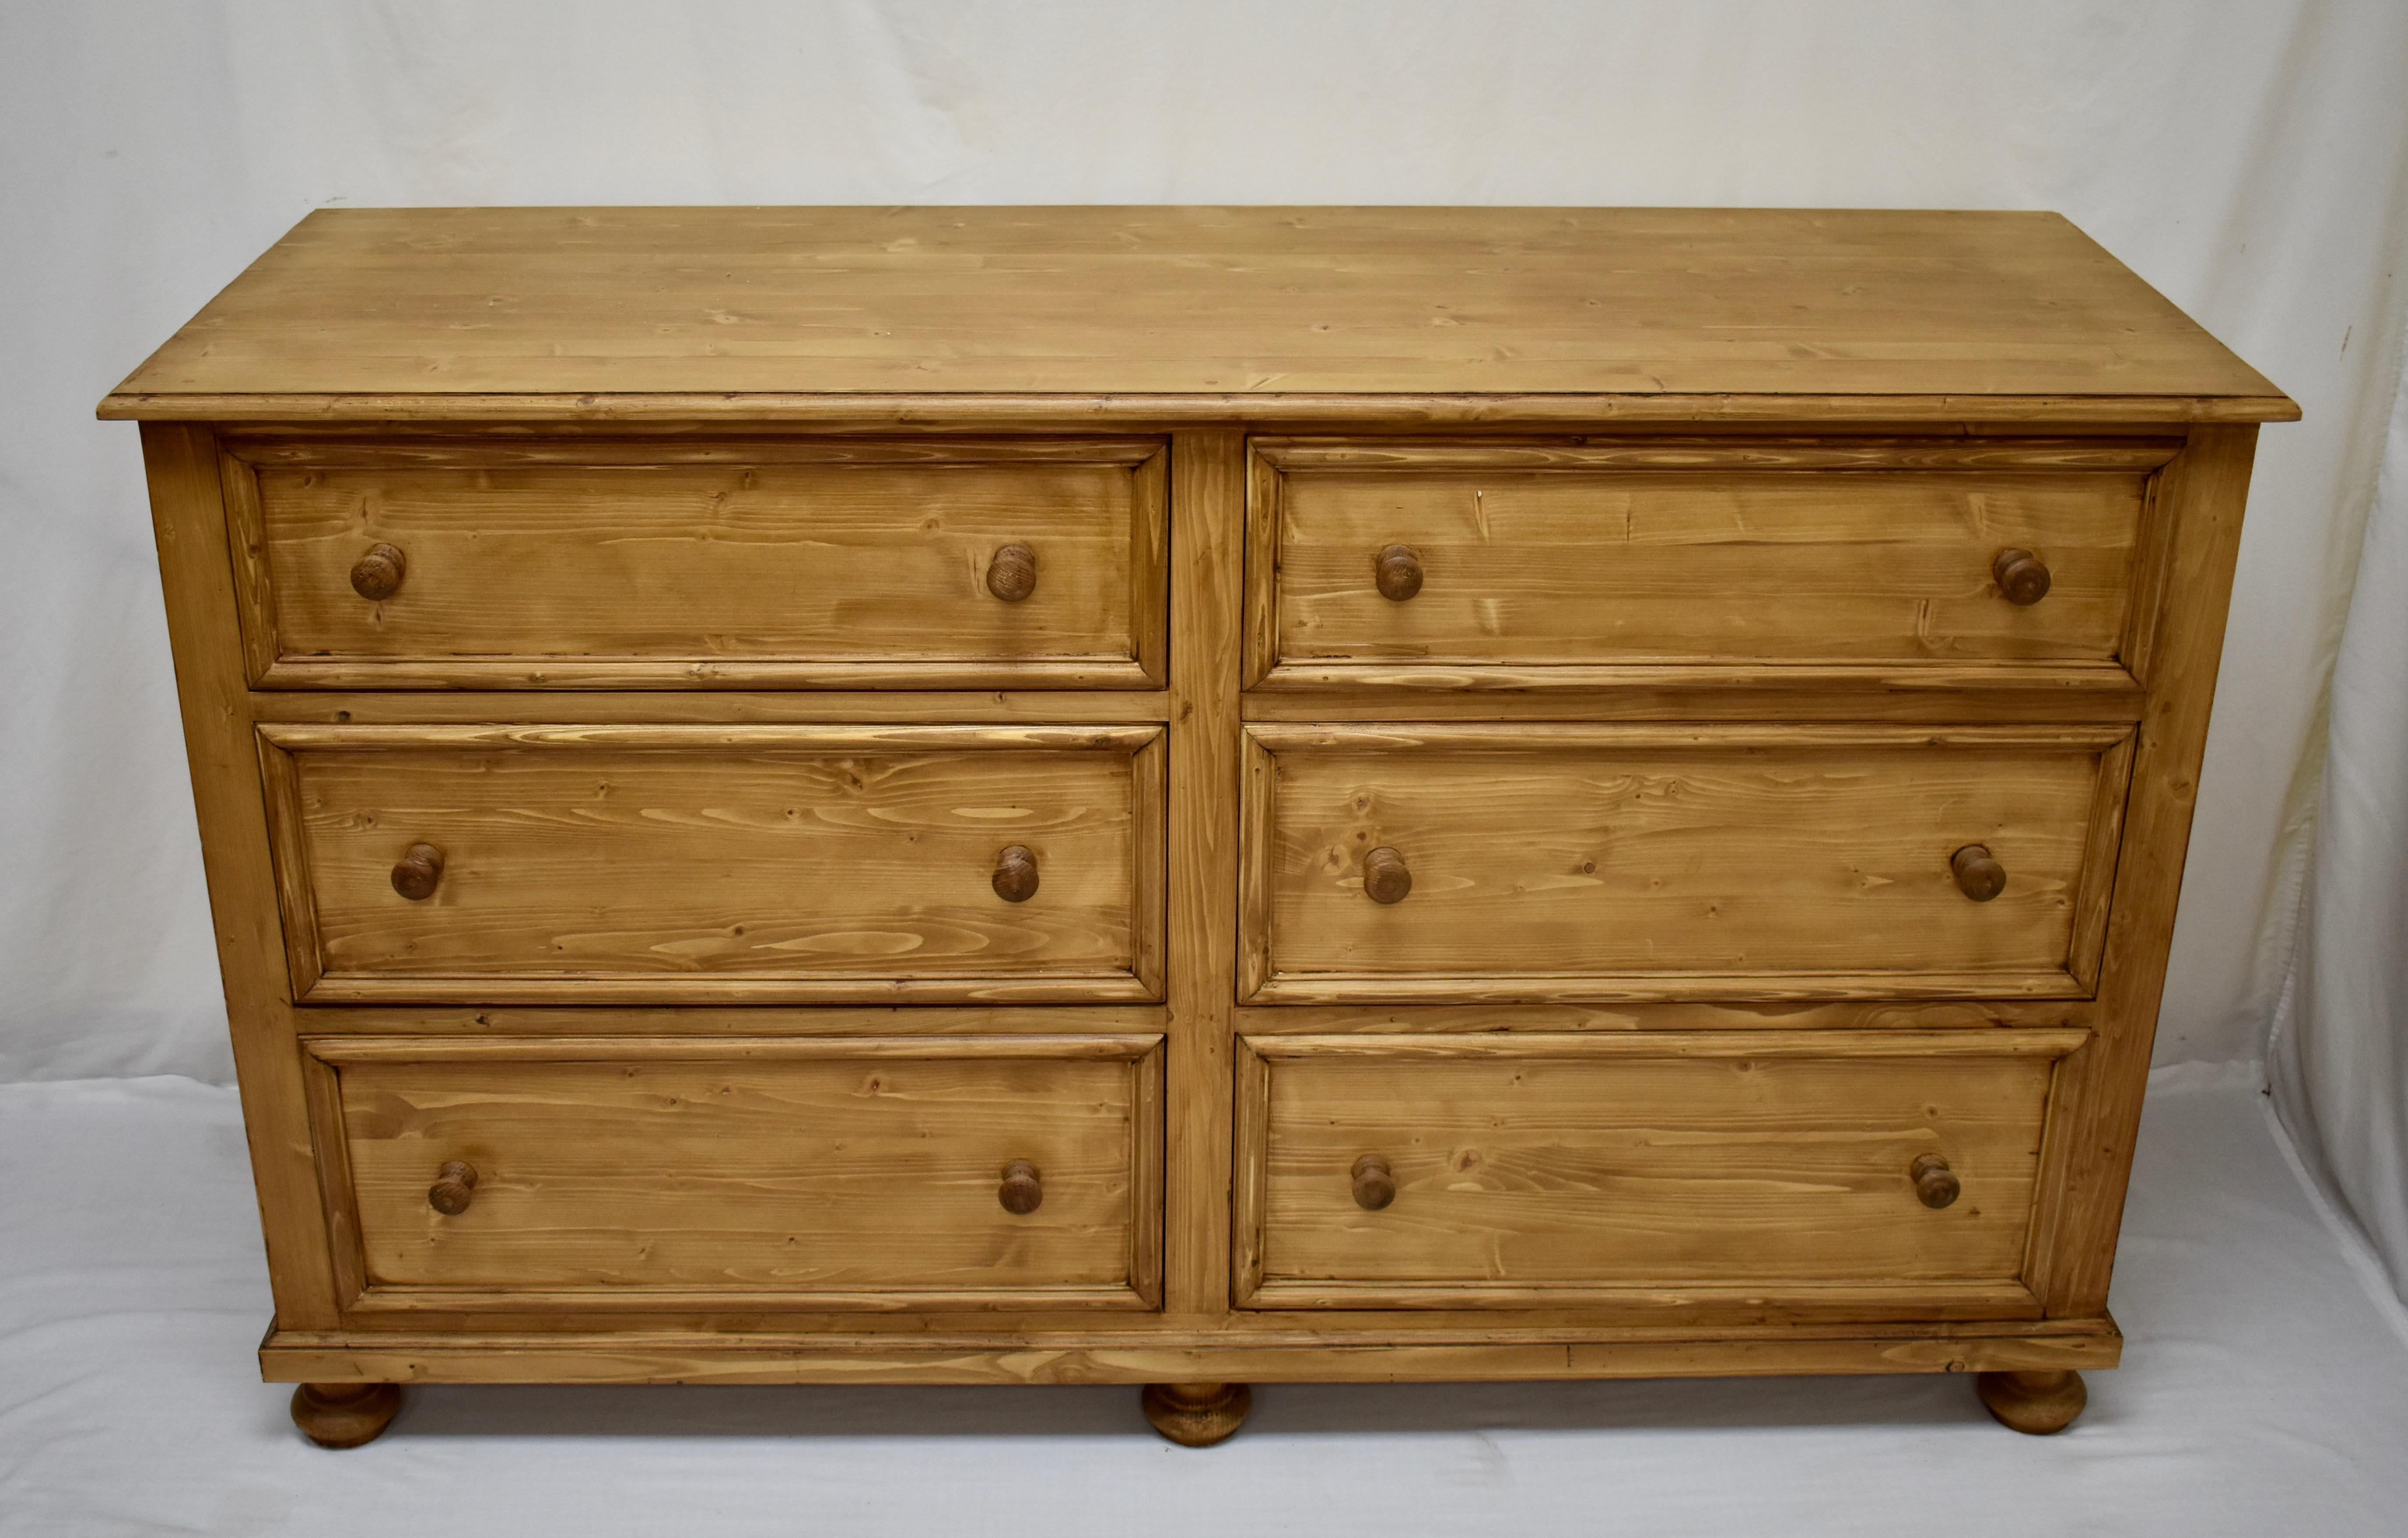 Long chests of drawers can be hard to find in antique pine so our workshop in Europe takes lightly-used reclaimed pine to build this piece using design features and methods of construction seen on our antique pieces. This long chest of six slightly